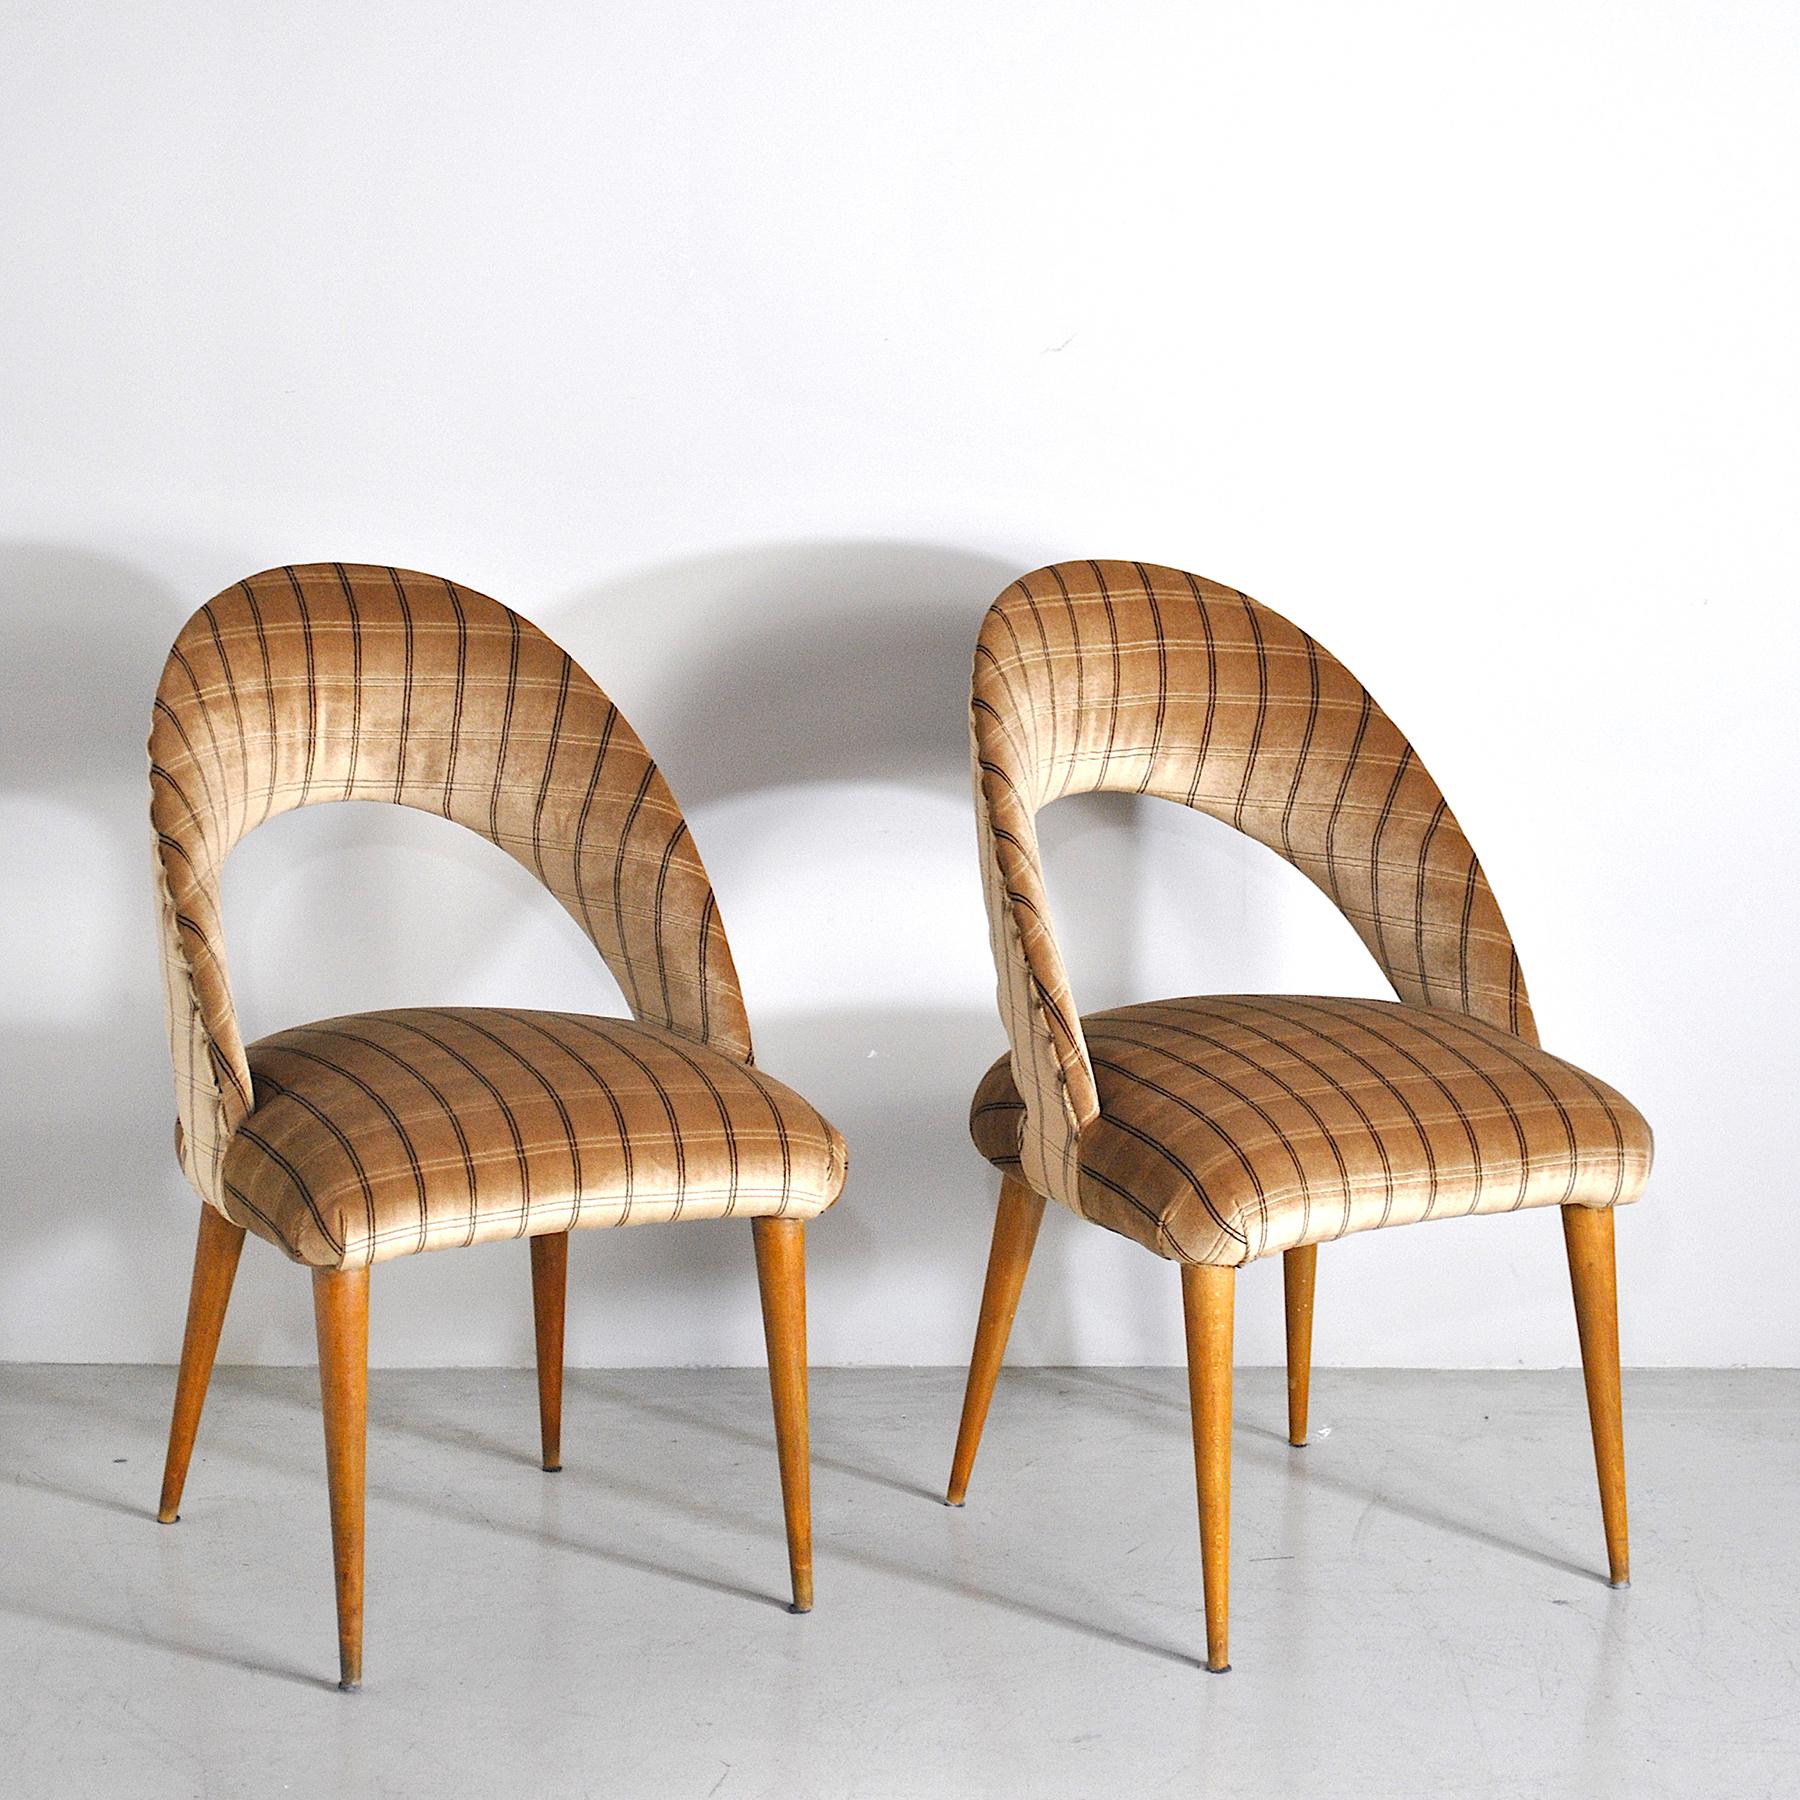 Pair of upholstered chairs from the Italian school of the 1960s in the Antonin Šuman style for Tatra Pravenec.